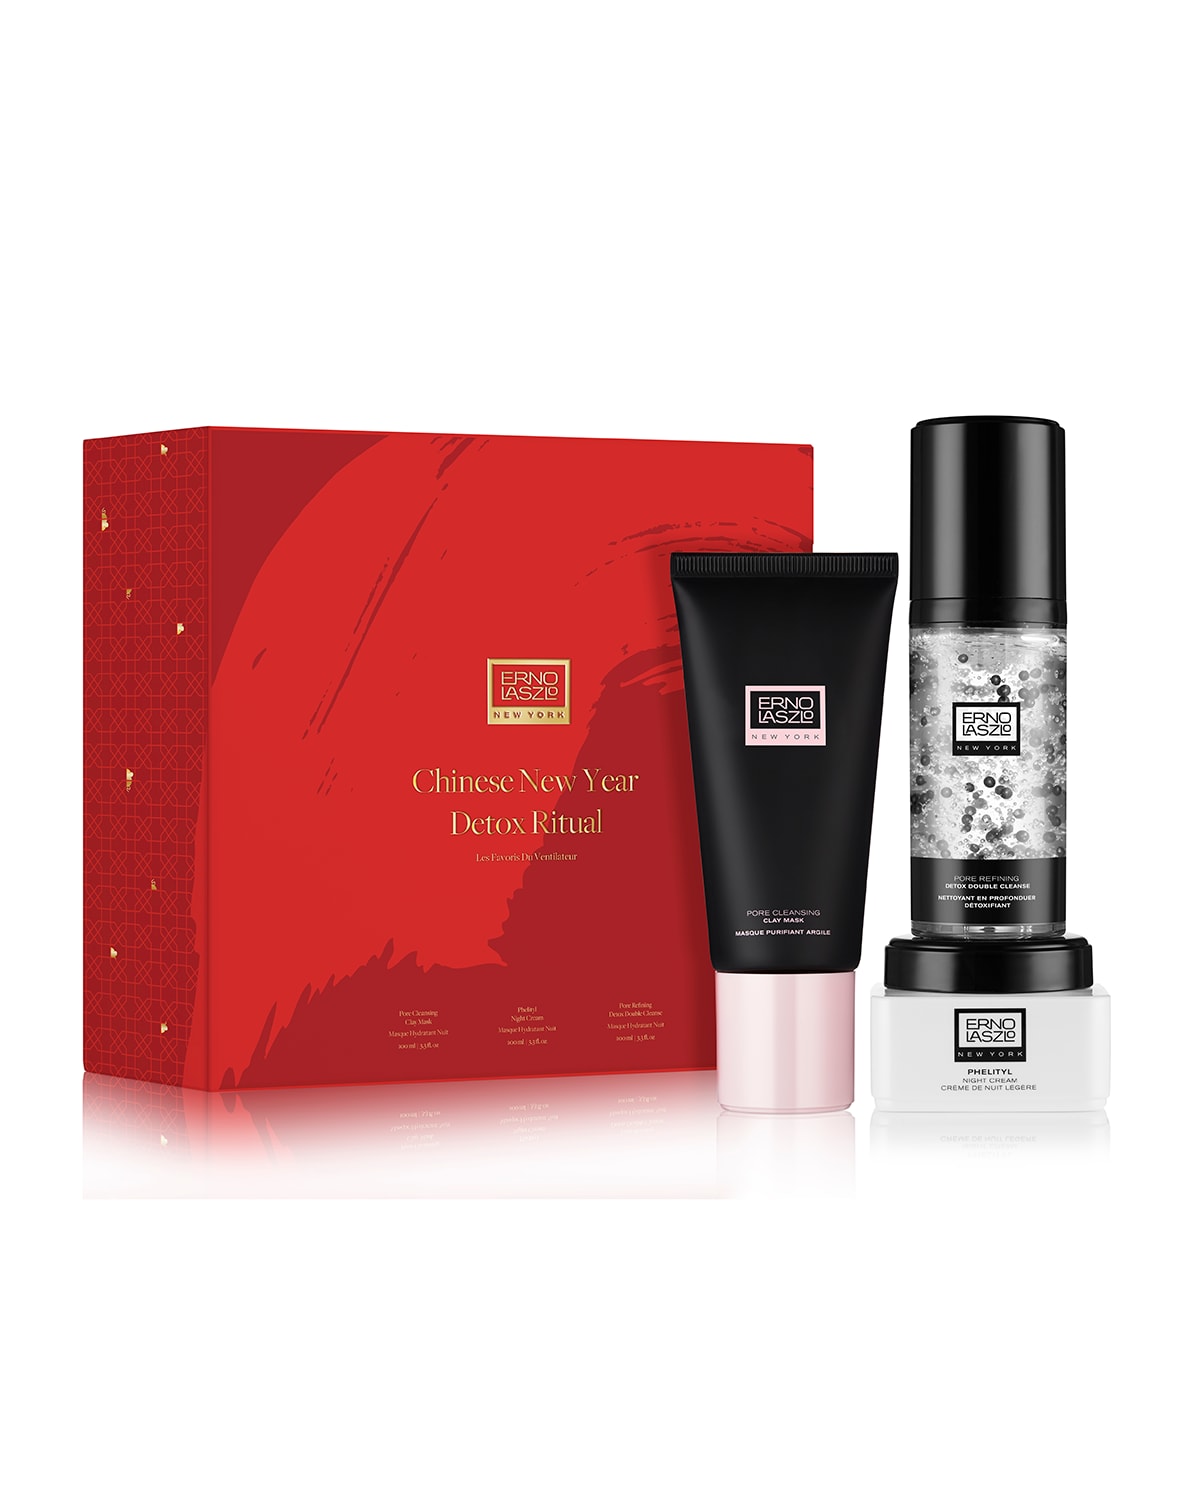 Chinese New Year Detox Ritual Set ($229 Value)